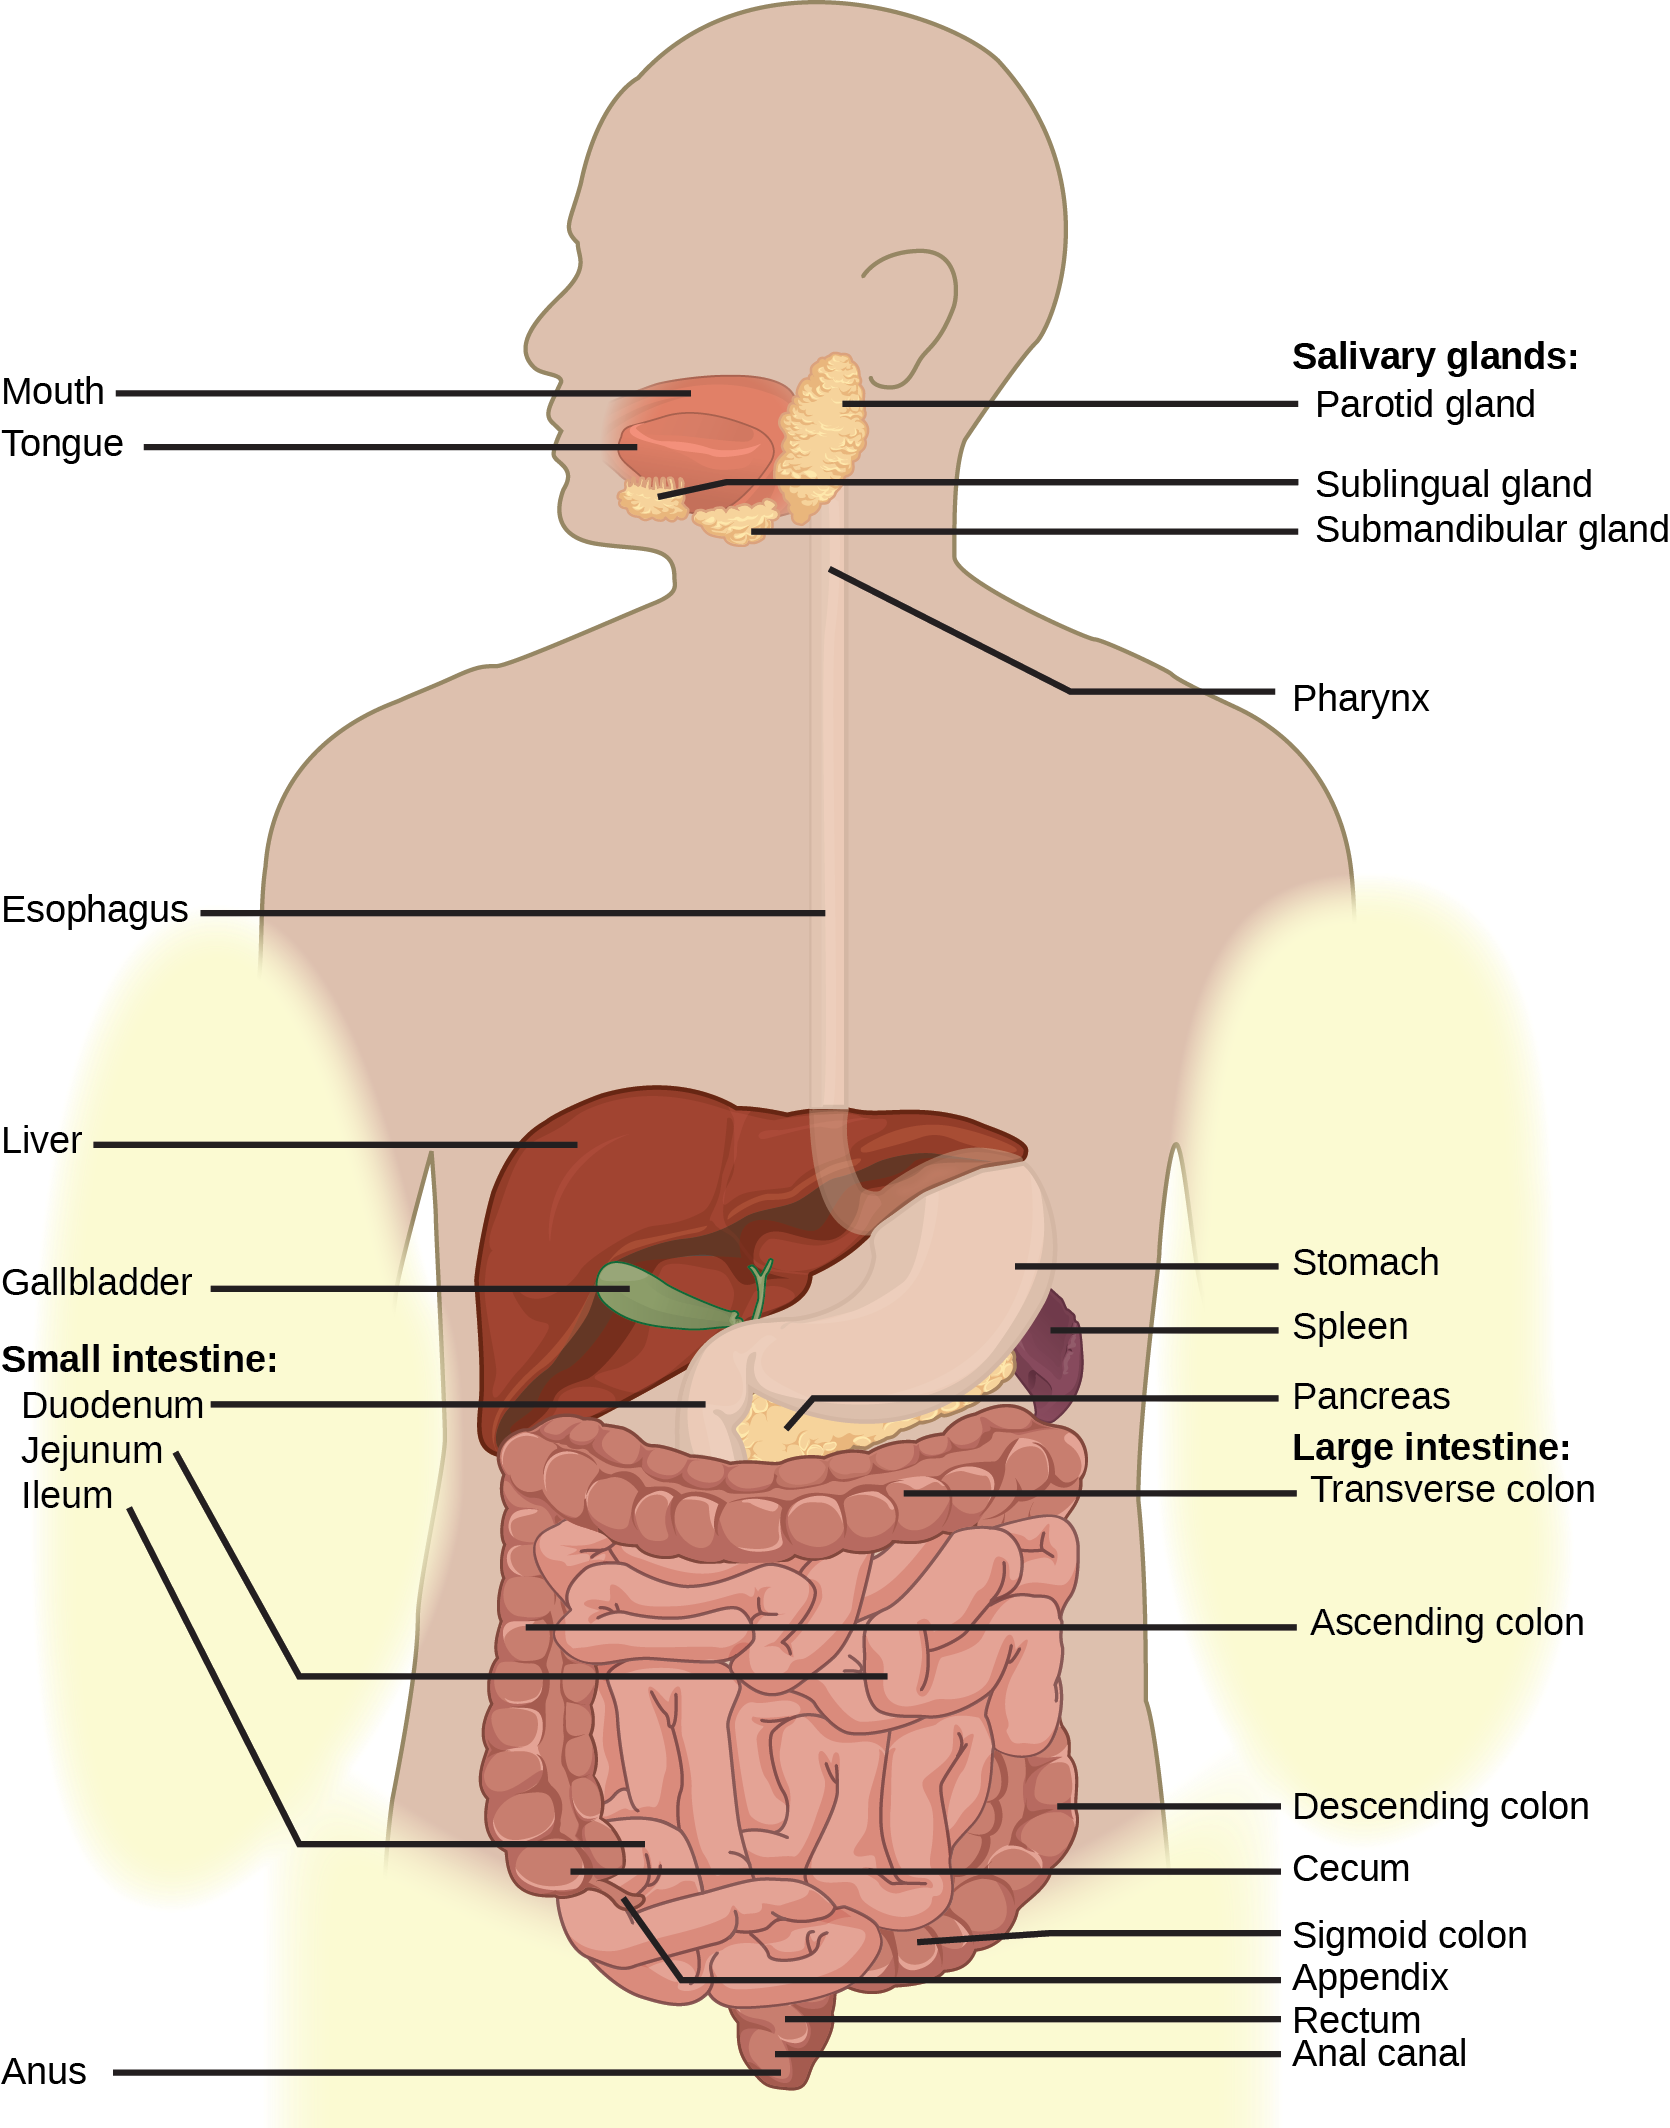 Illustration shows the human lower digestive system, which begins with the stomach, a sac that lies above the large intestine. The stomach empties into the small intestine, which is a long, highly folded tube. The beginning of the small intestine is called the duodenum, the long middle part is called the jejunum, and the end is called the ileum. The ileum empties into the large intestine on the right side of the body. Beneath the junction of the small and large intestine is a small pouch called the cecum. The appendix is at the bottom end of the cecum. The large intestine travels up the left side of the body, across the top of the small intestine, then down the right side of the body. These parts of the large intestine are called the ascending colon, the transverse colon and the descending colon, respectively. The large intestine empties into the rectum, which is connected to the anus. The pancreas is sandwiched between the stomach and large intestine. The liver is a triangular organ that sits above and slightly to the right of the stomach. The gallbladder is a small bulb between the liver and stomach.